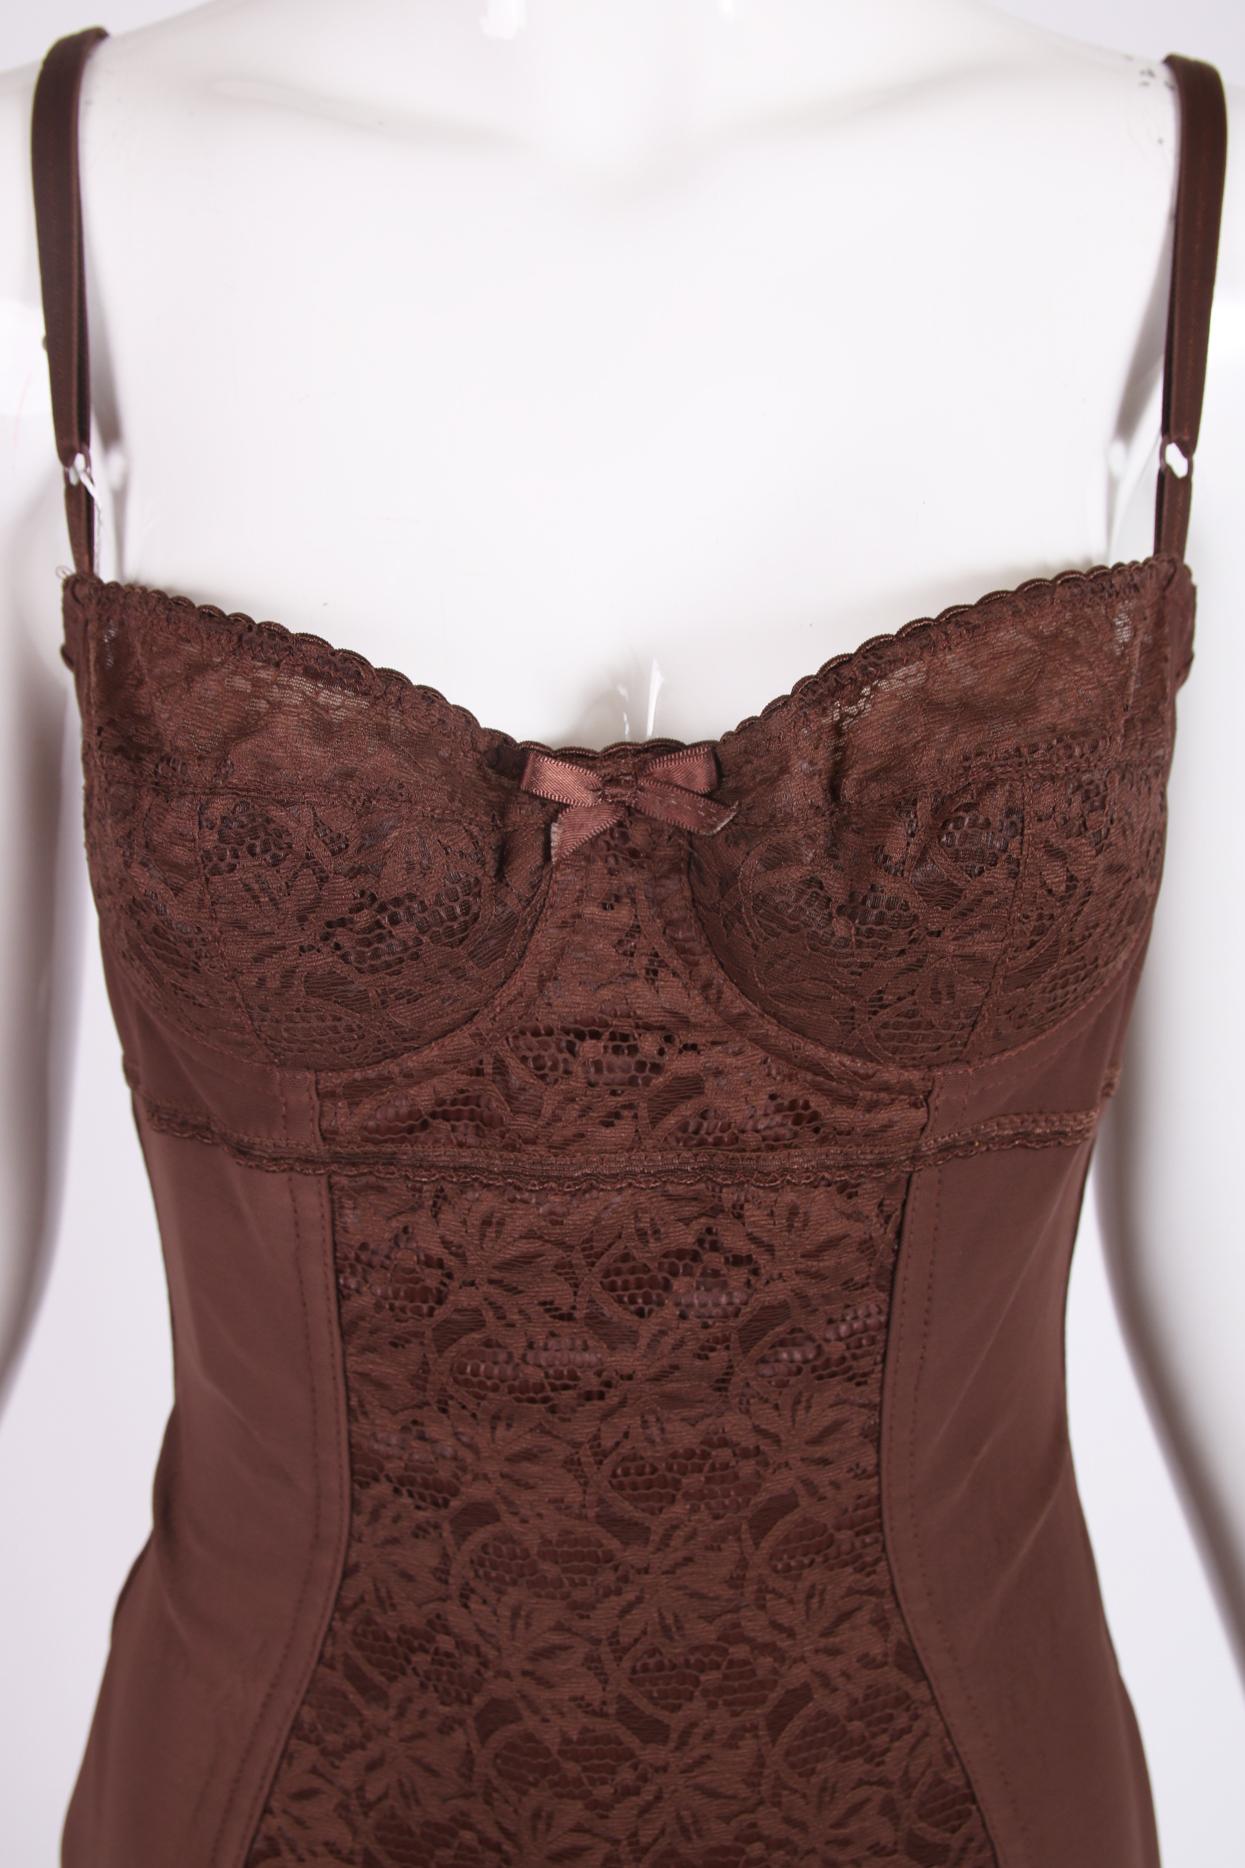 Dolce & Gabbana brown stretch bodysuit with lace at the bust and center front panel. Bra straps are sizable, and there are hook and eye closures at the crotch. Size tag 44. Fabric is a nylon, elastane blend. In excellent condition, with original